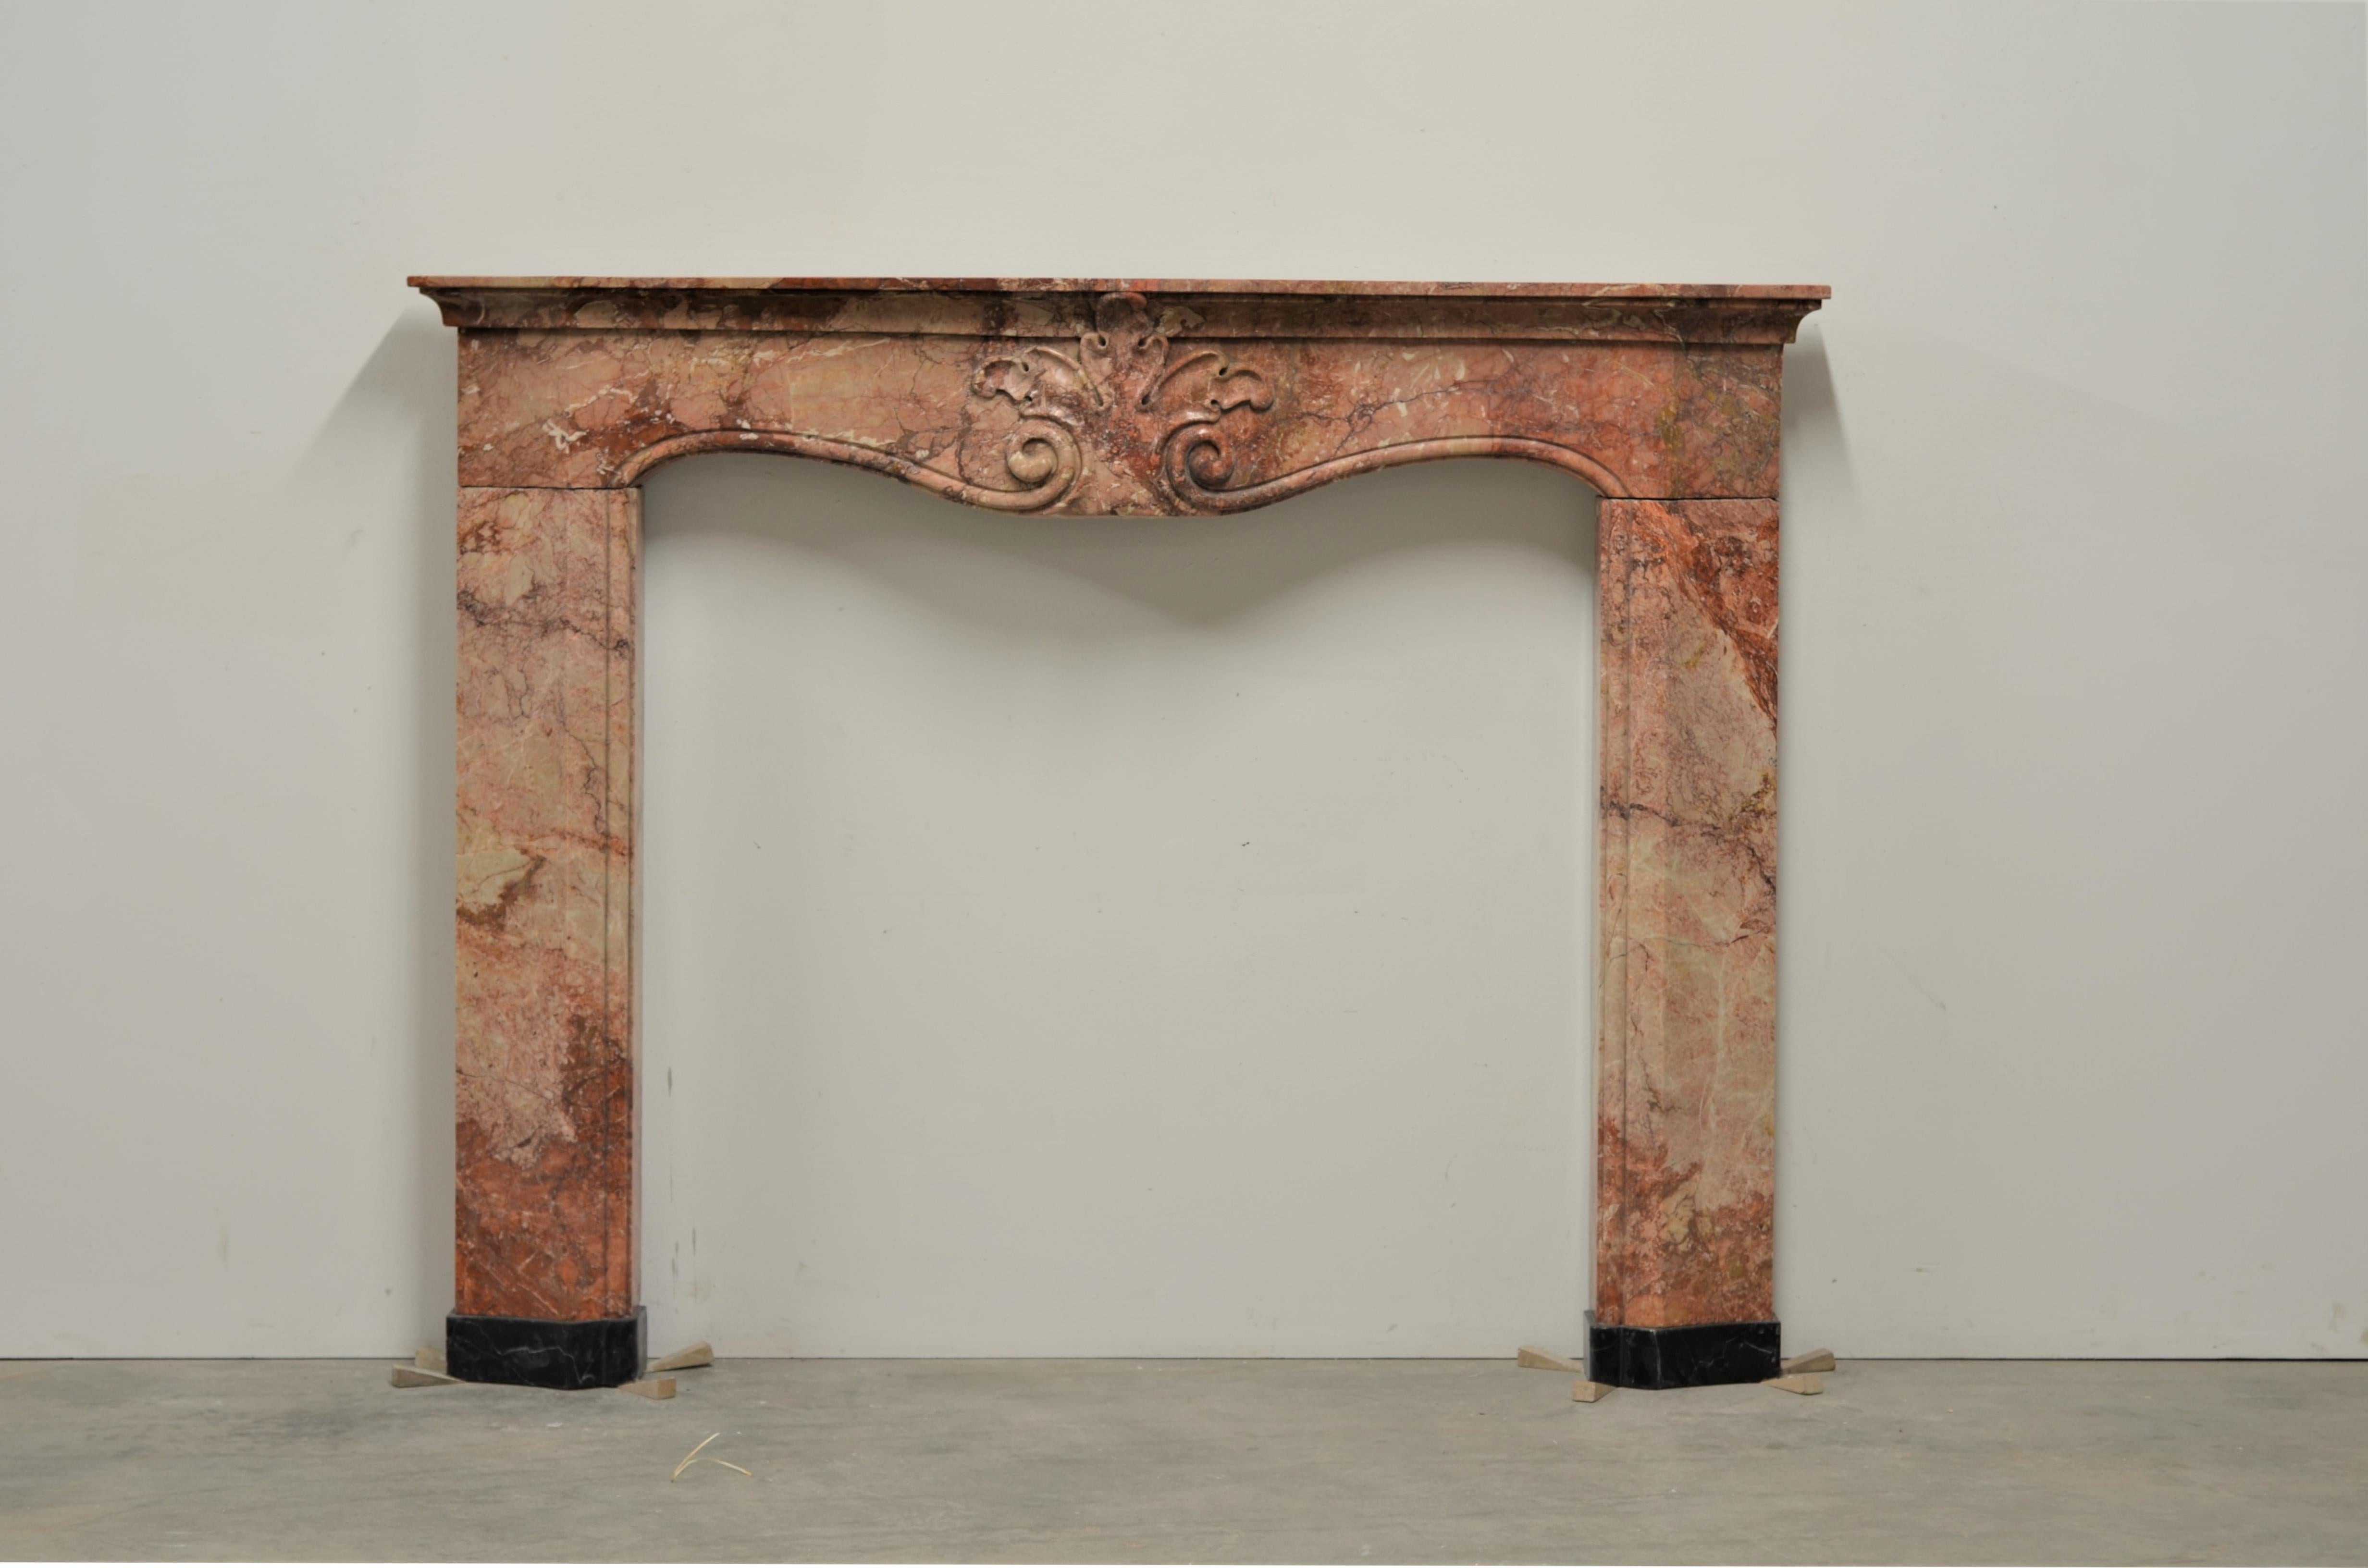 Very nice and colorful fireplace mantel from the Northern part of Italy.
This Italian beauty dated from the beginning of the 19th century it was reclaimed from a large estate.
Its vivid marble, strong shapes and lovely central shell make this a